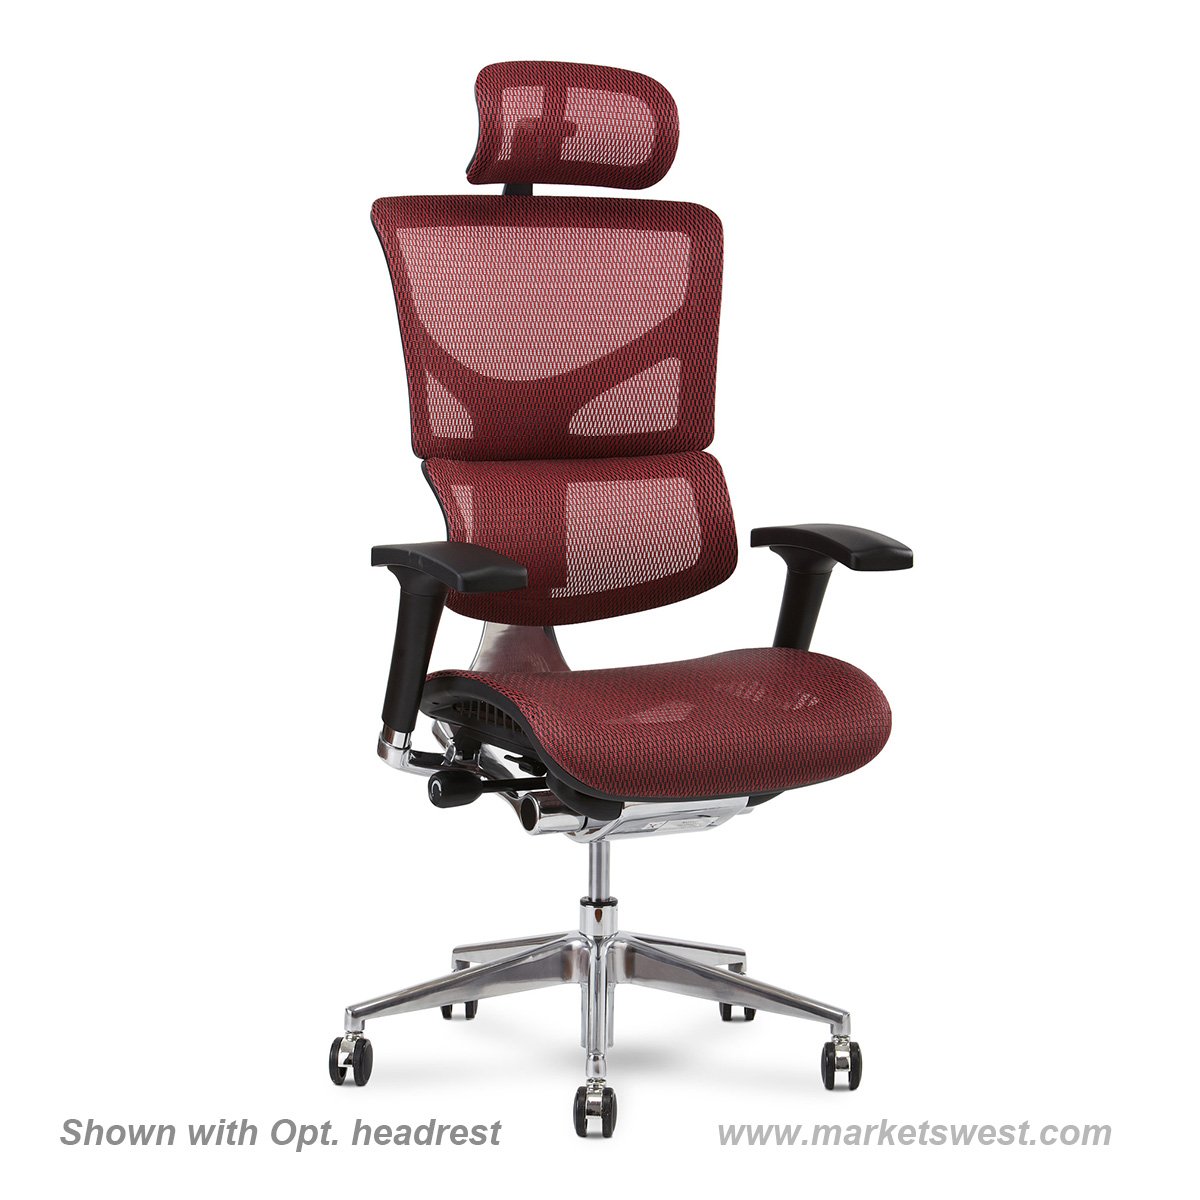 X-Chair X1 High End Task Chair, Grey Flex Mesh with Headrest - Ergonomic  Office Seat/Dynamic Variable Lumbar Support/Highly Adjustable/Relaxed